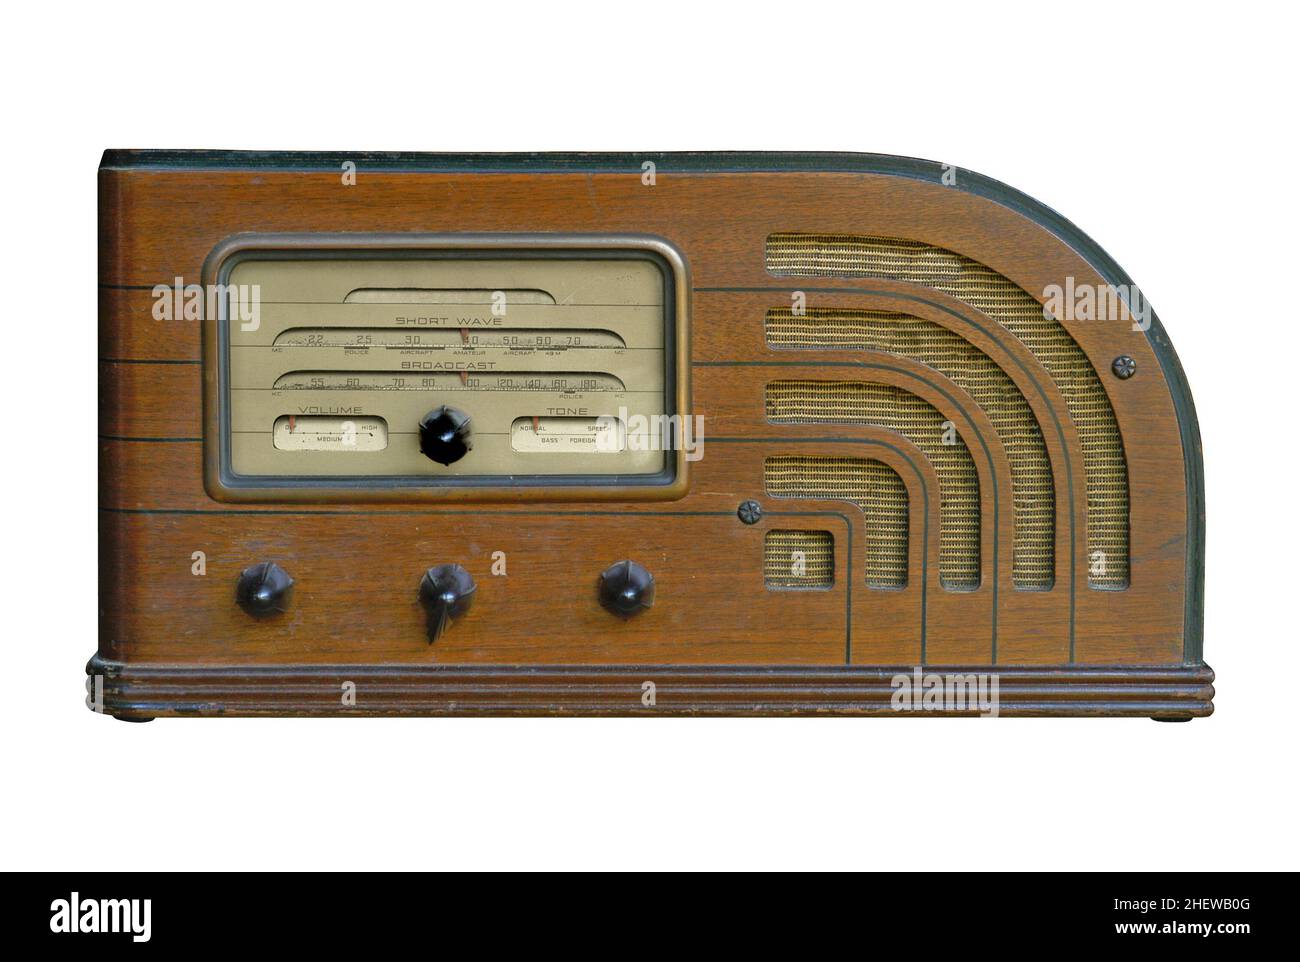 Vintage over the air tabel top radio radio from the Great Depression era  Stock Photo - Alamy